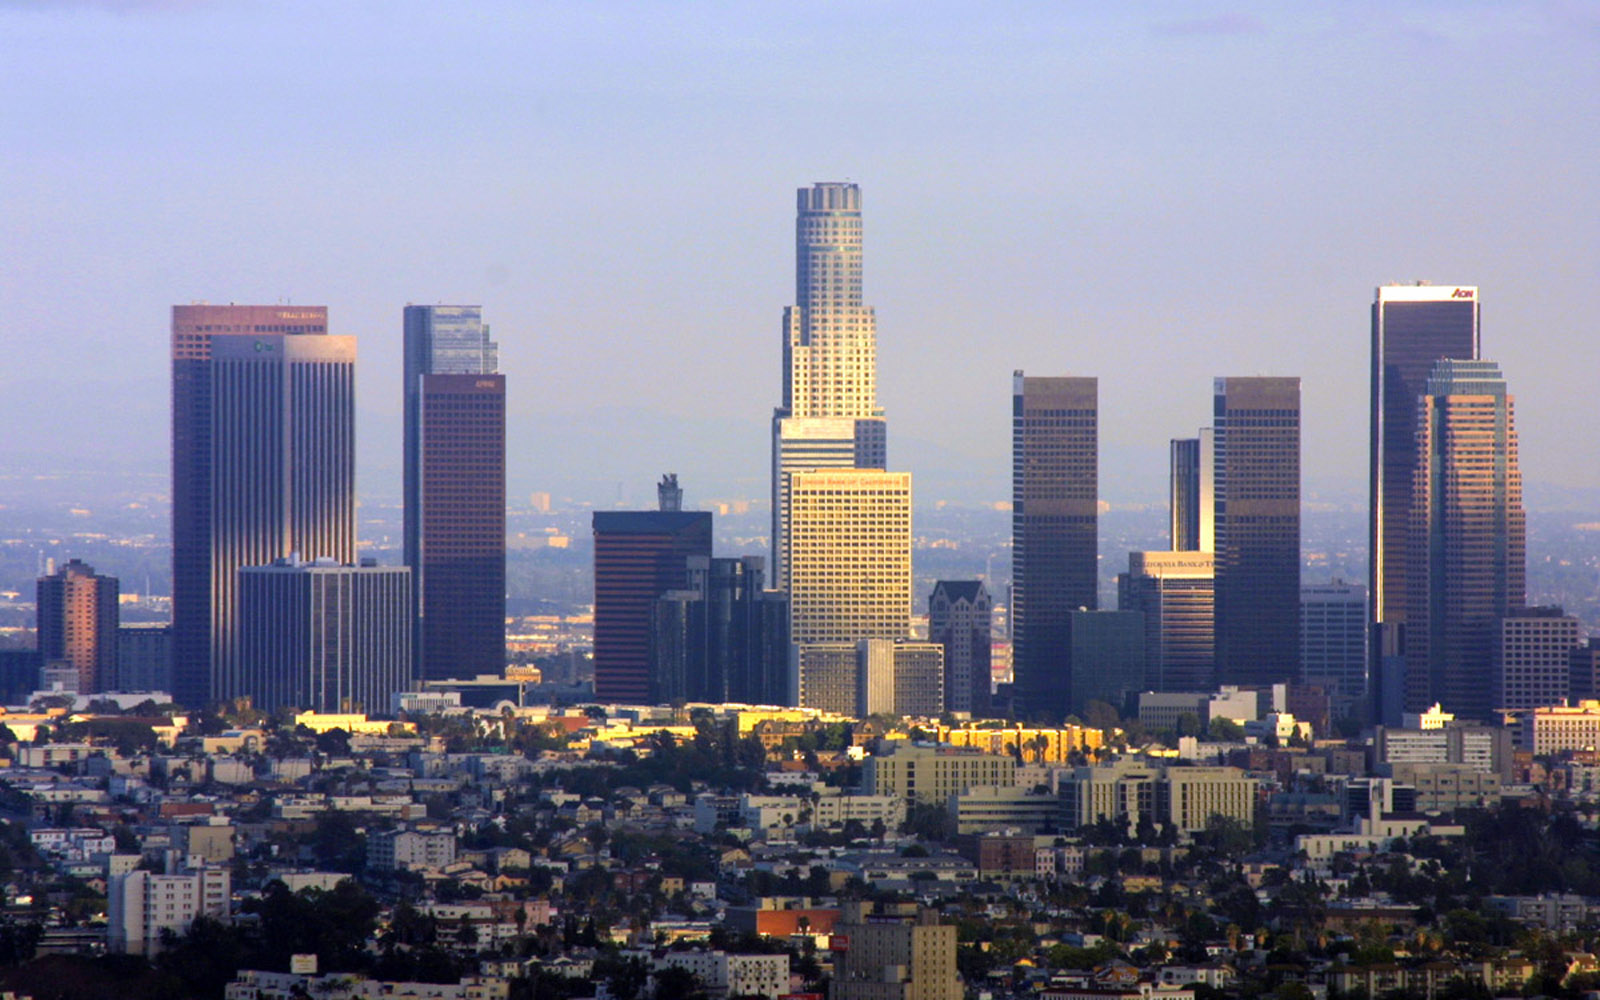 Tag Los Angeles Wallpaper Image Photos And Pictures For